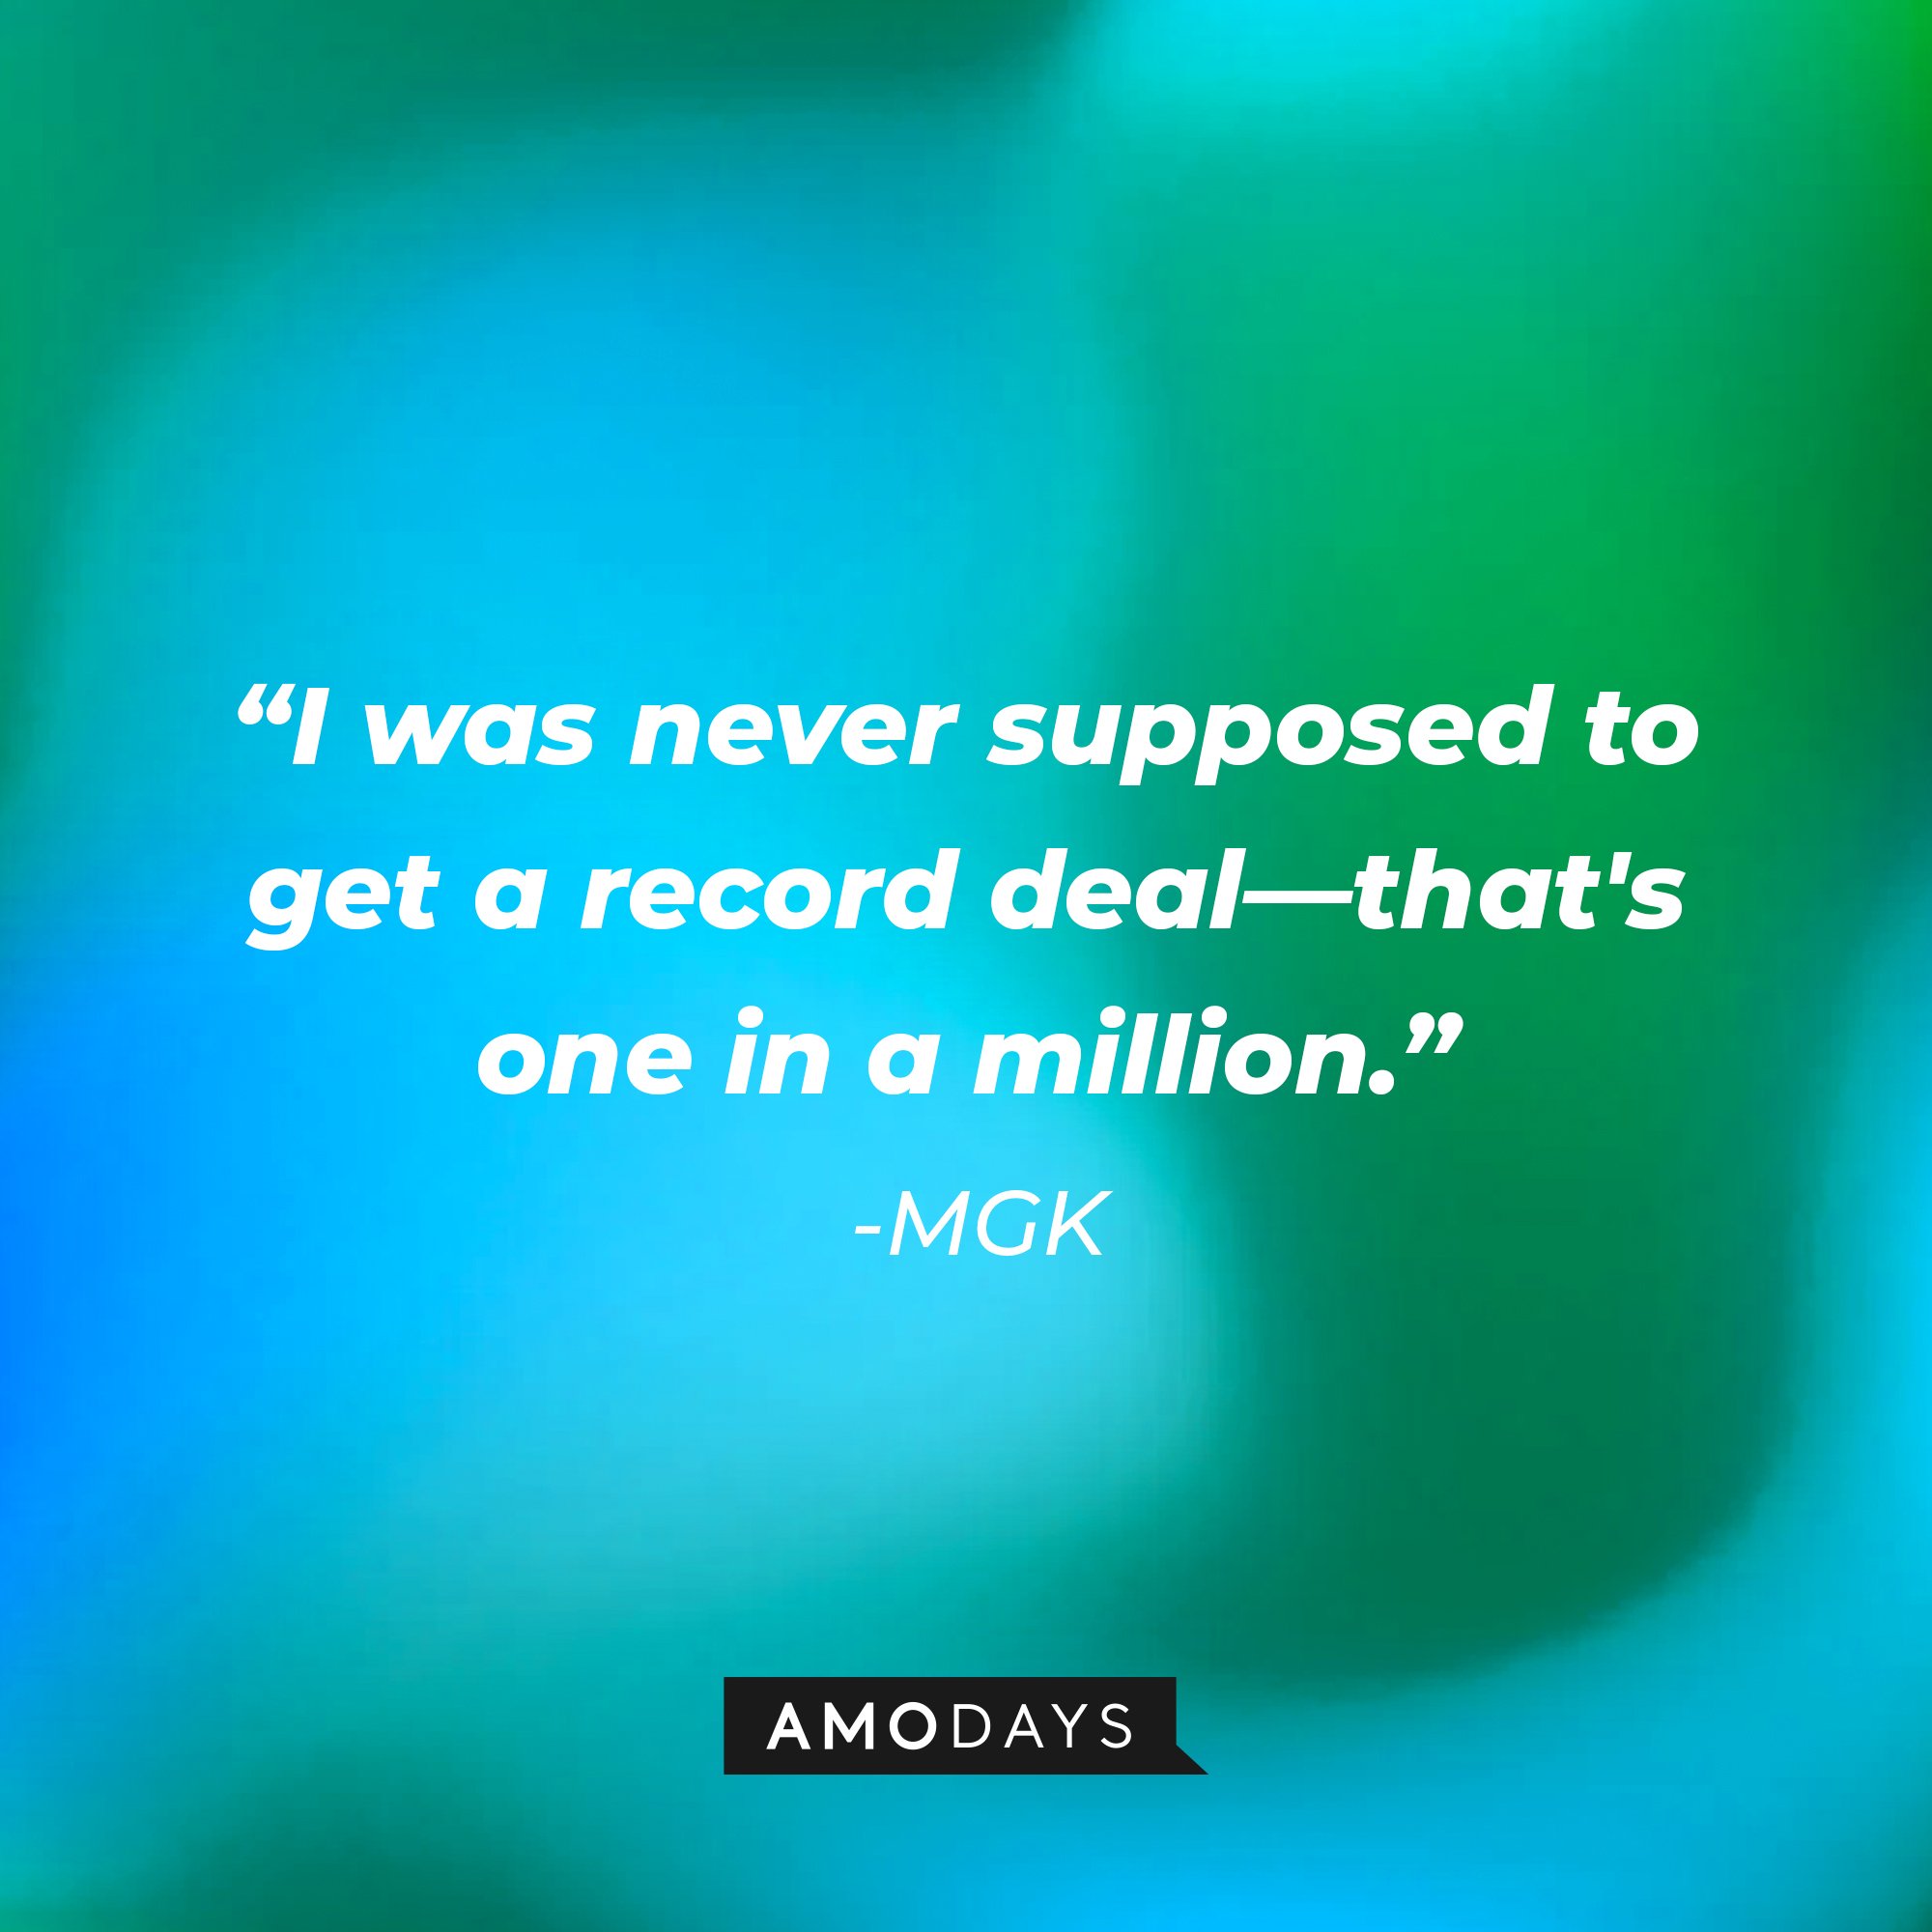 MGK's quote: "I was never supposed to get a record deal—that's one in a million." | Image: AmoDays